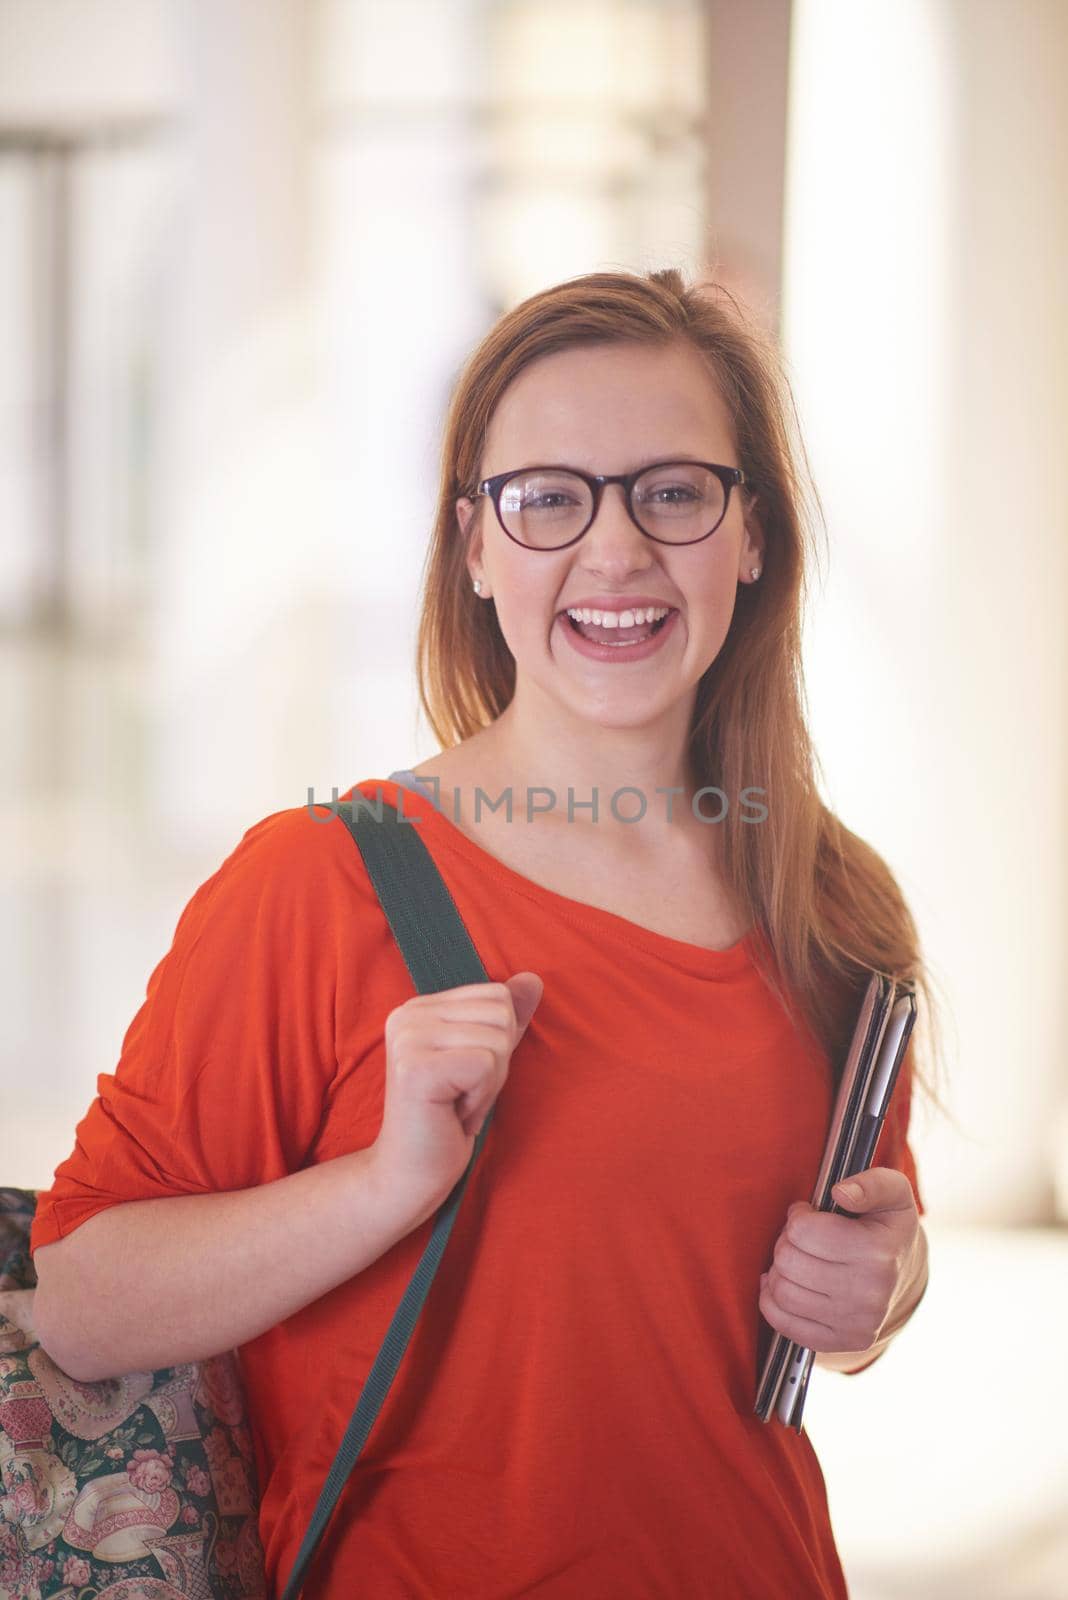 student girl with tablet computer by dotshock